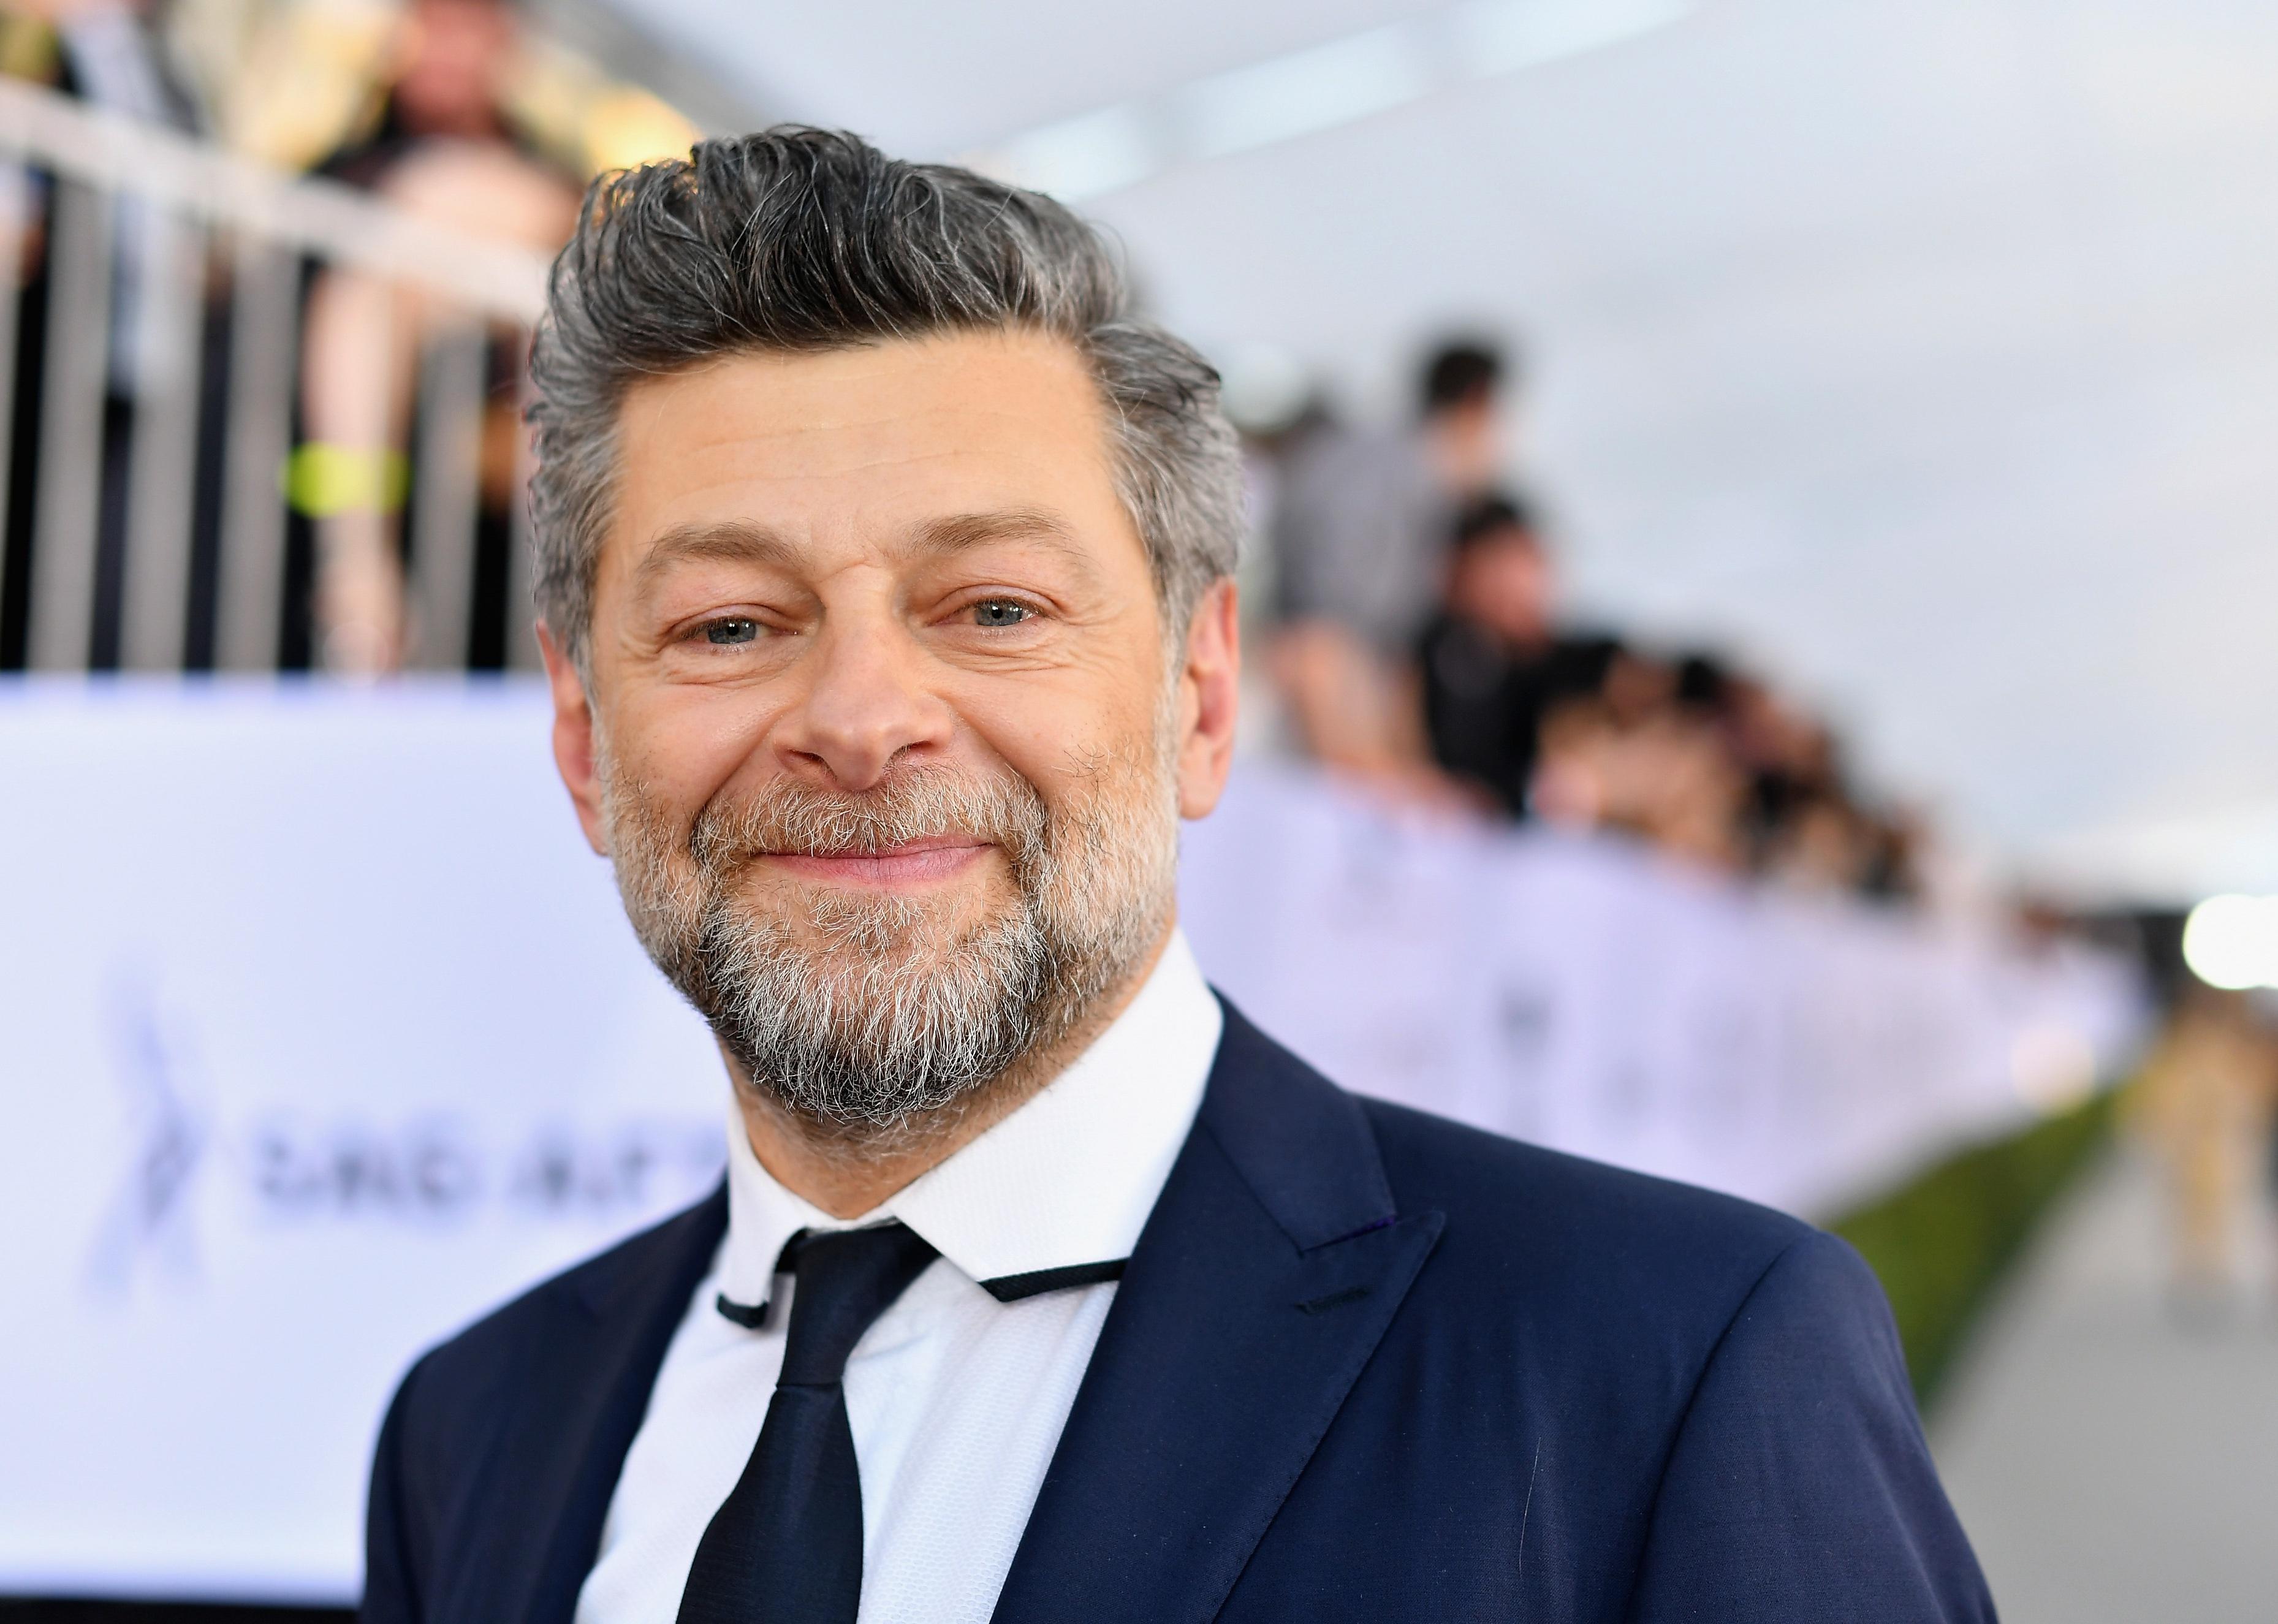 Andy Serkis in a navy suit.